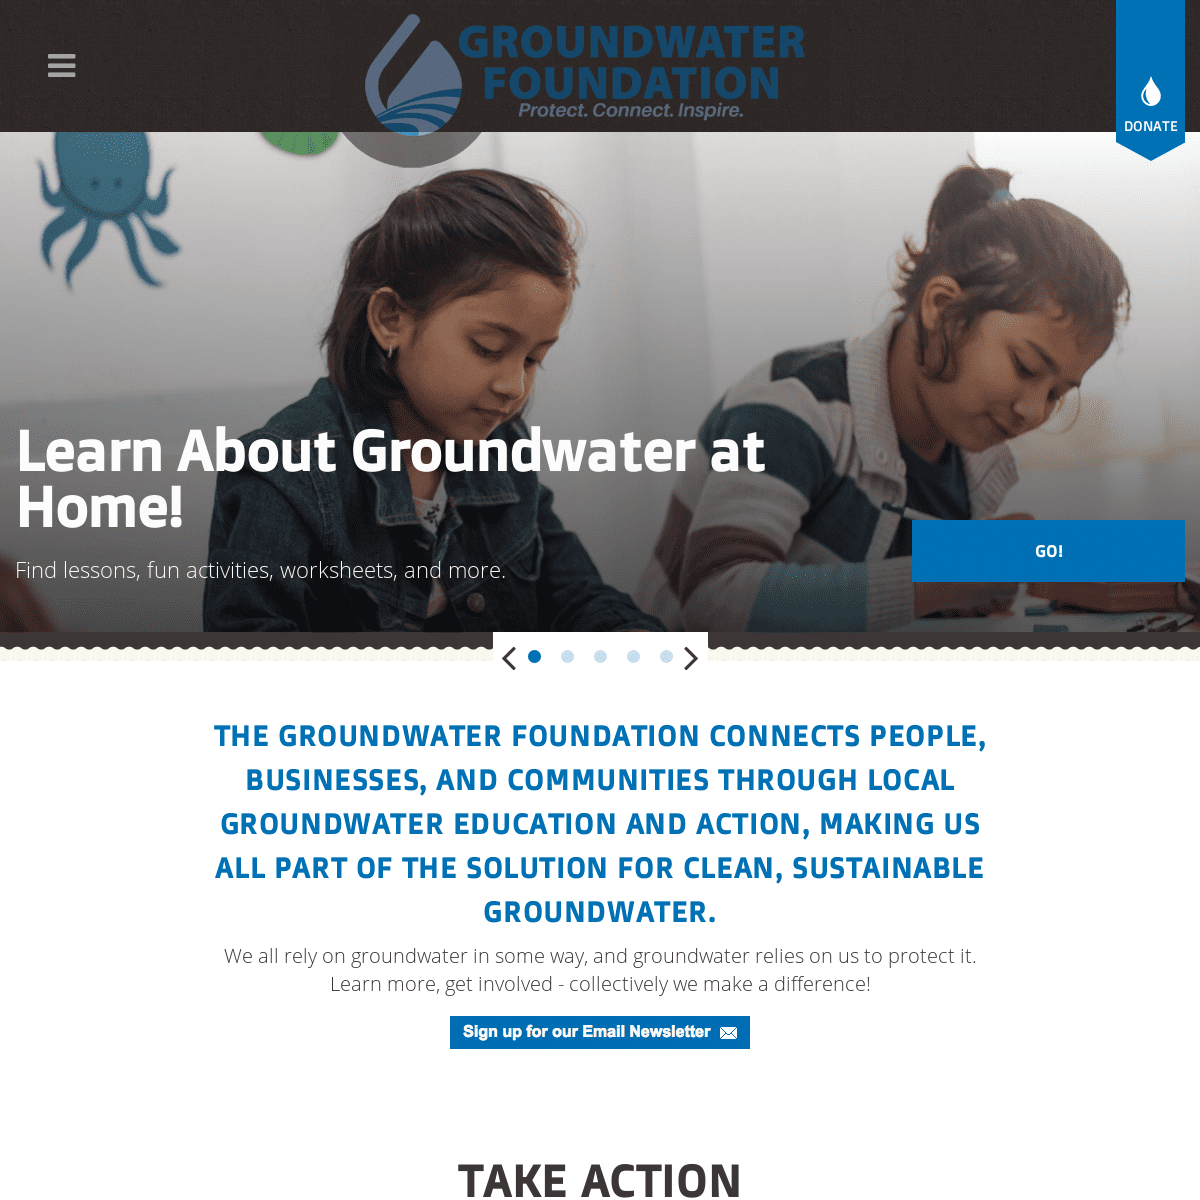 A complete backup of https://groundwater.org